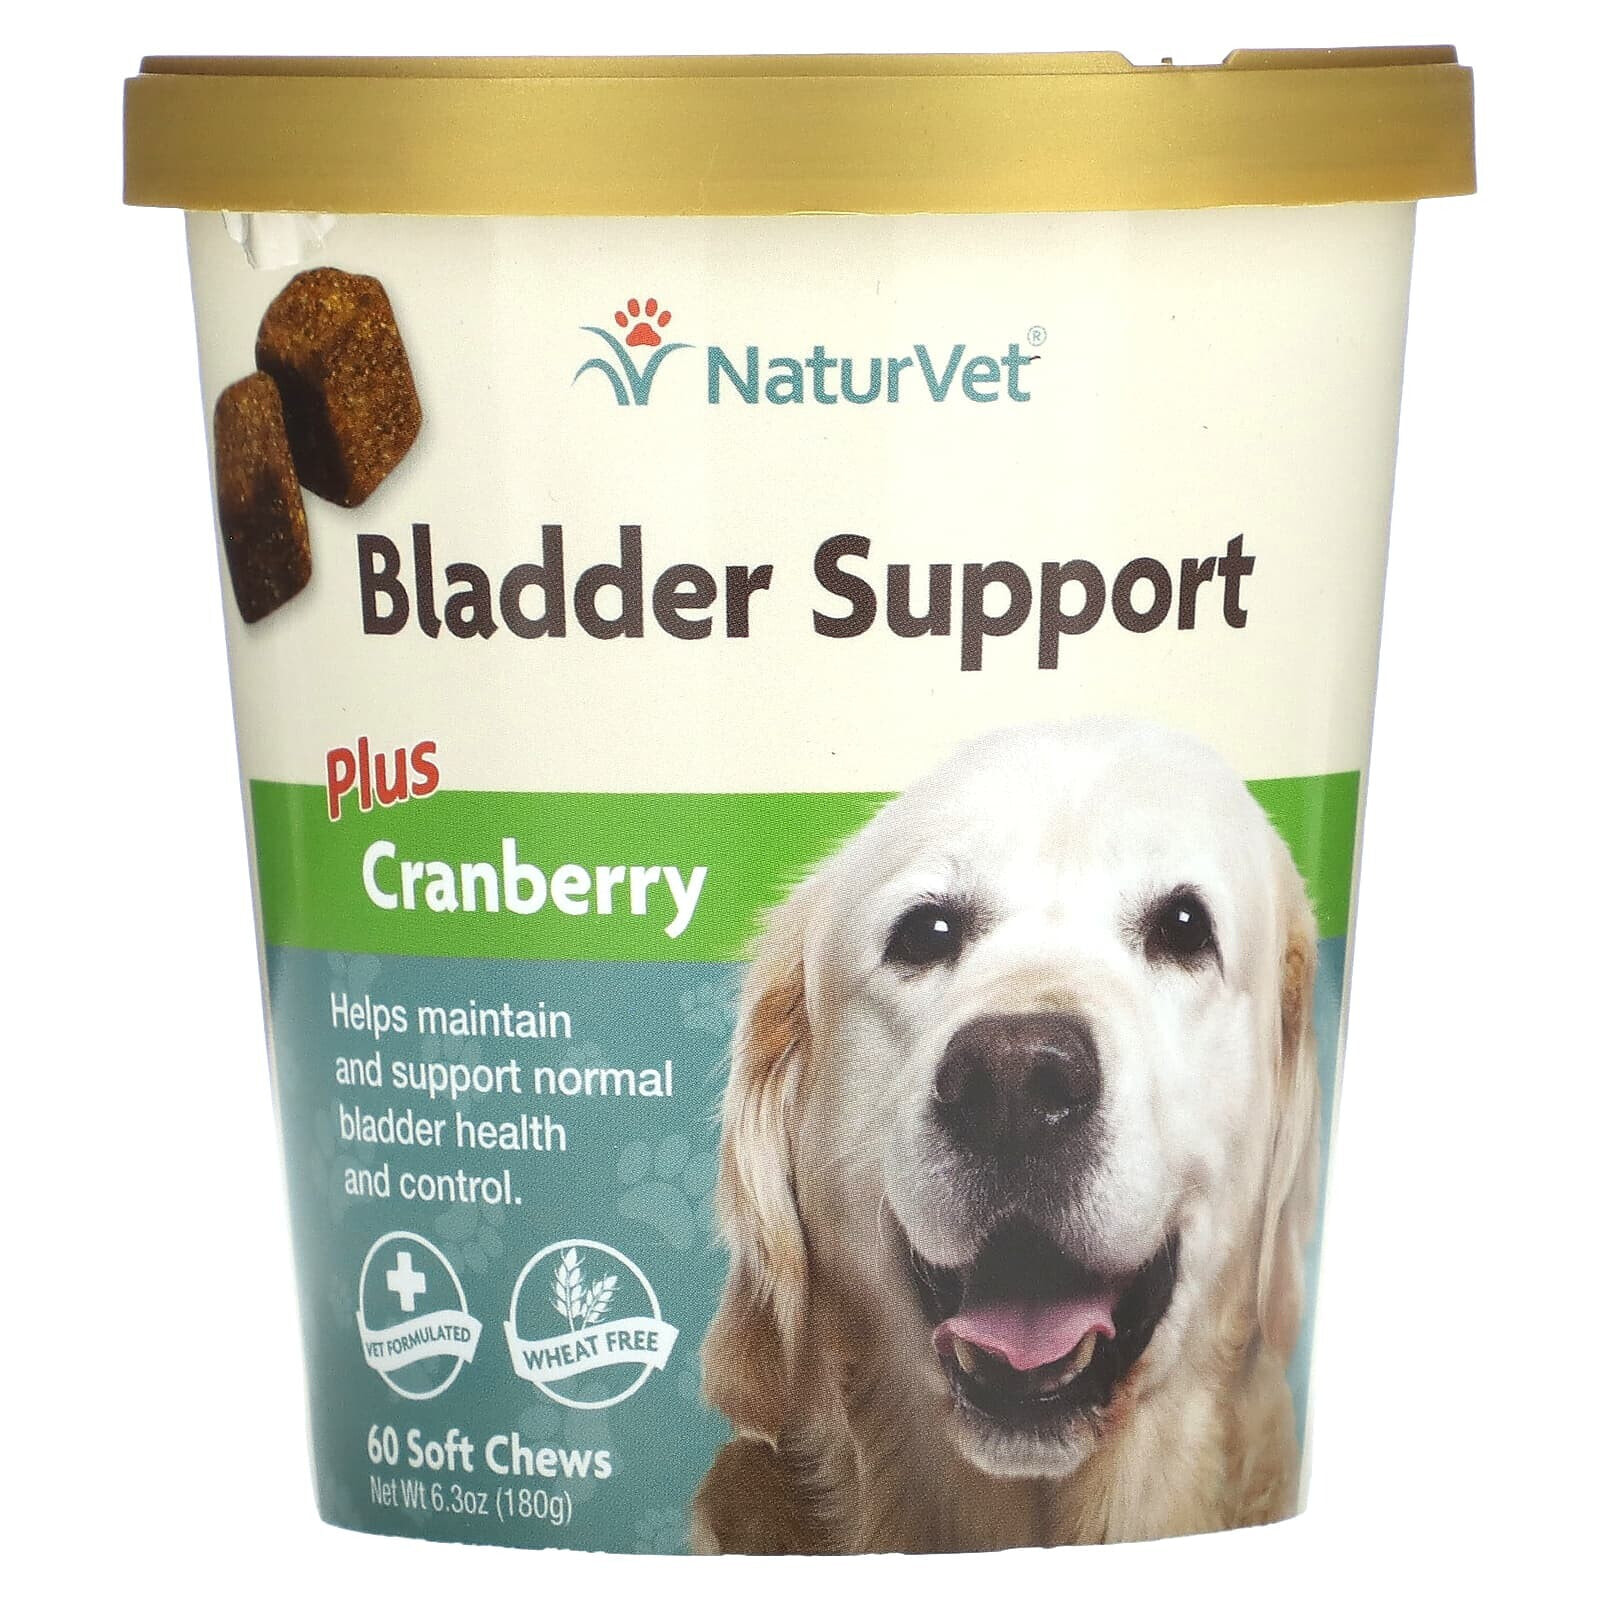 Bladder Support Daily Maintenance + Cranberry, For Dogs, 60 Soft Chews, 6.3 oz (180 g)